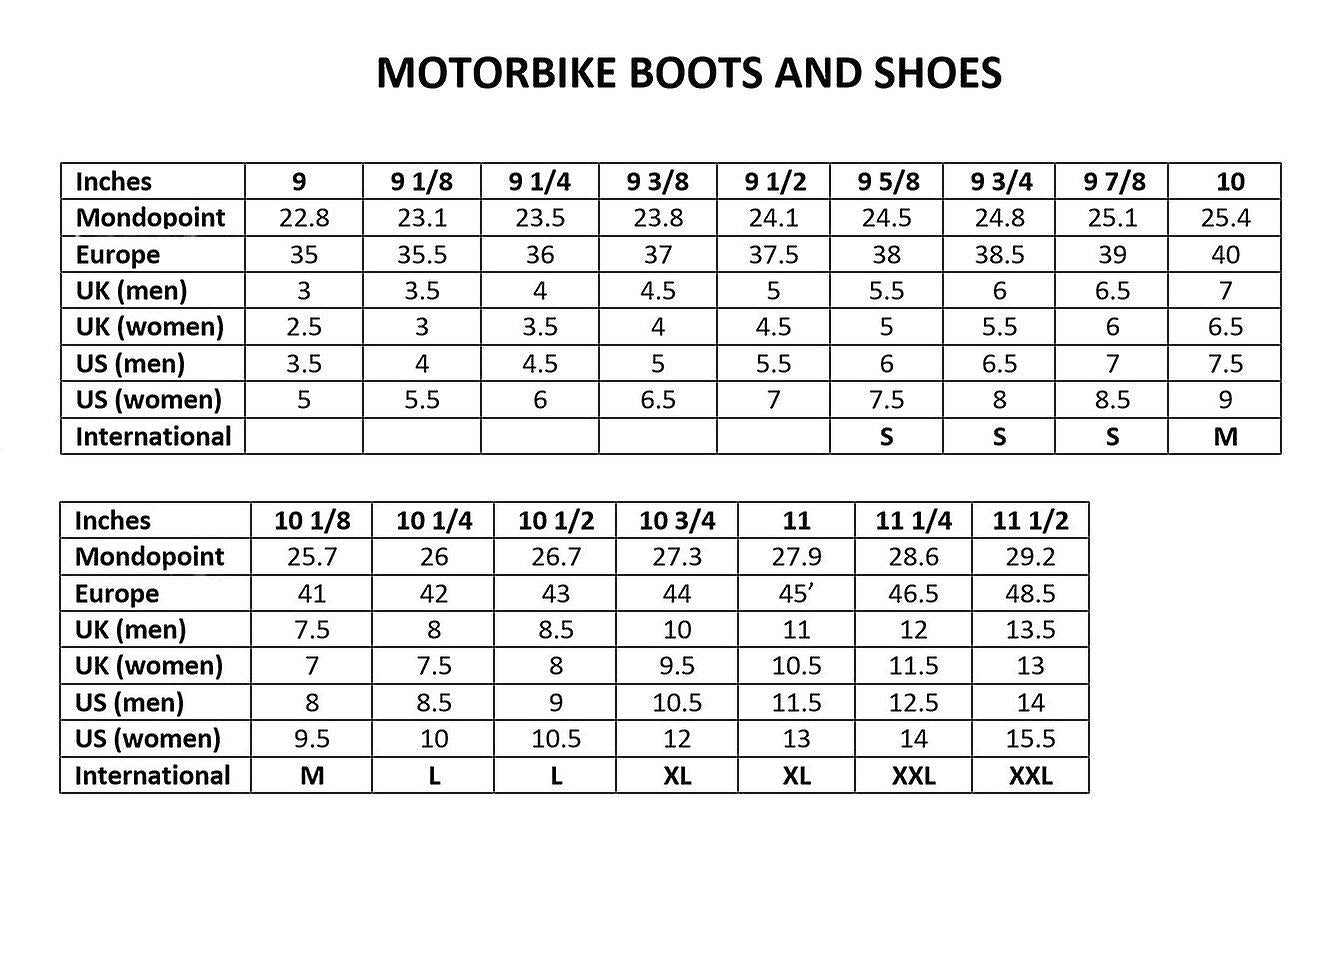 Mens Leather Motorbike Motorcycle Racing Sports Shoes Boots MN-015